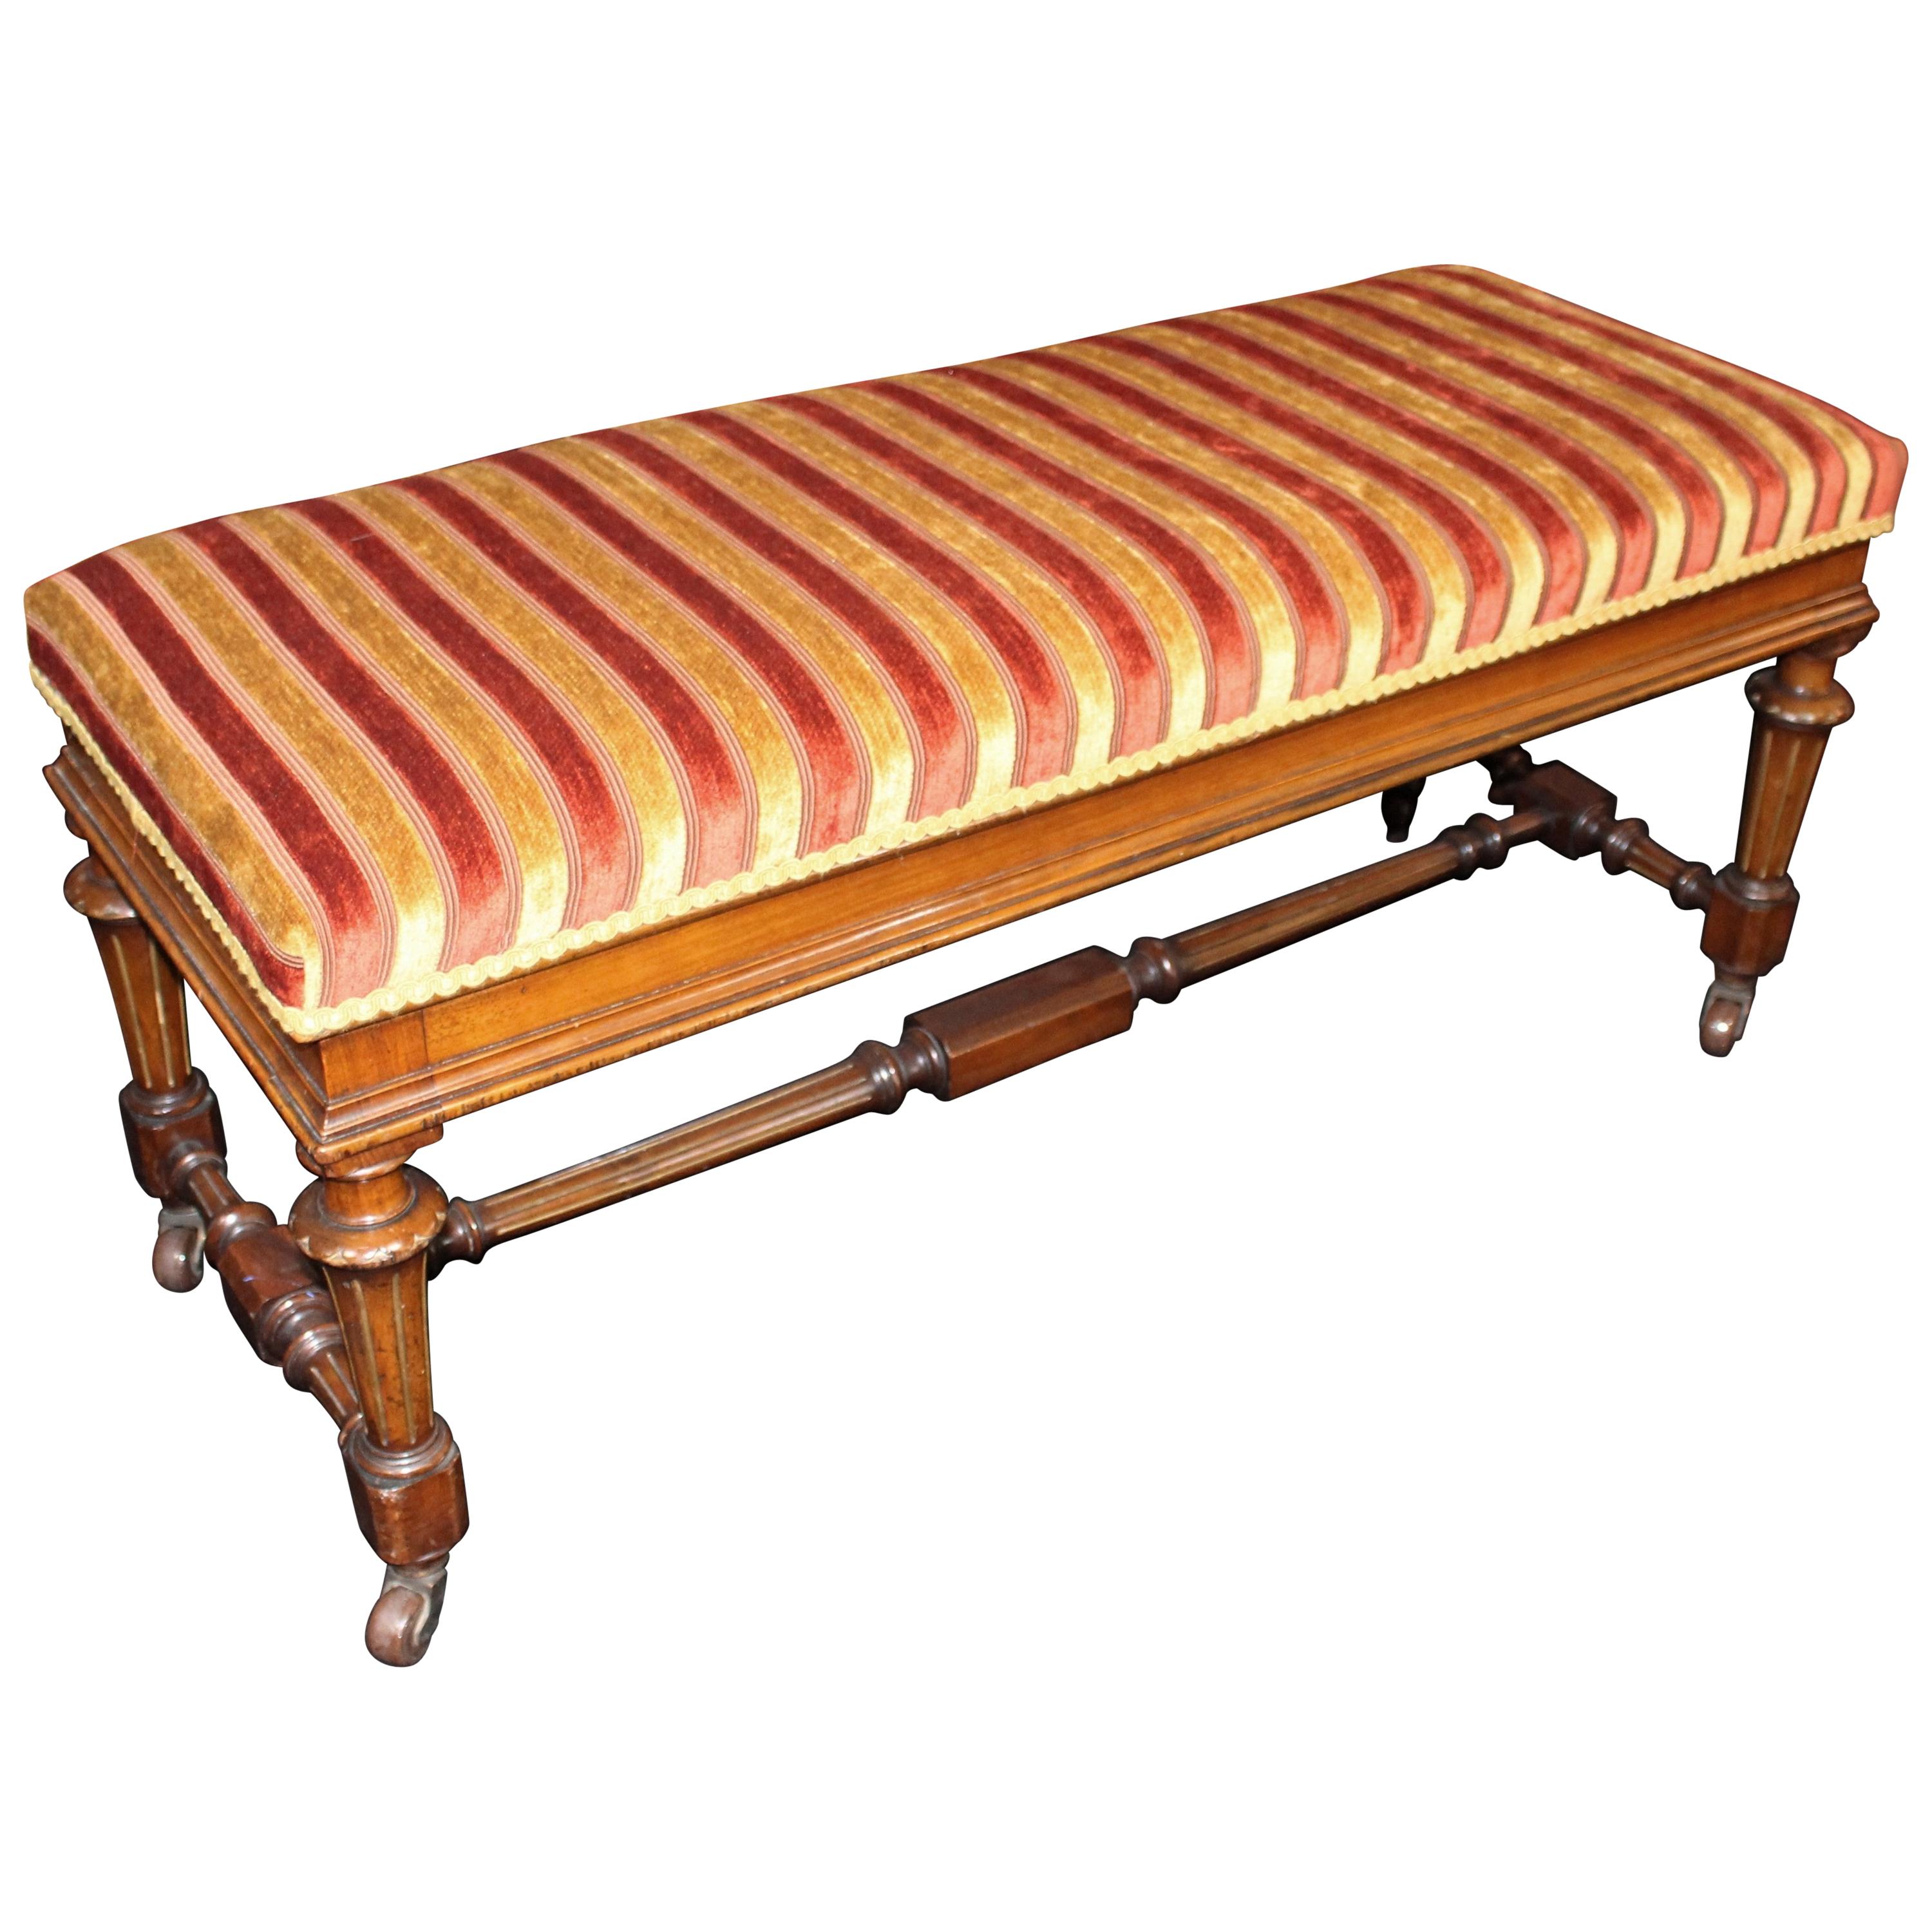 Fine Antique Striped Upholstered Walnut and Gilt Duet Stool